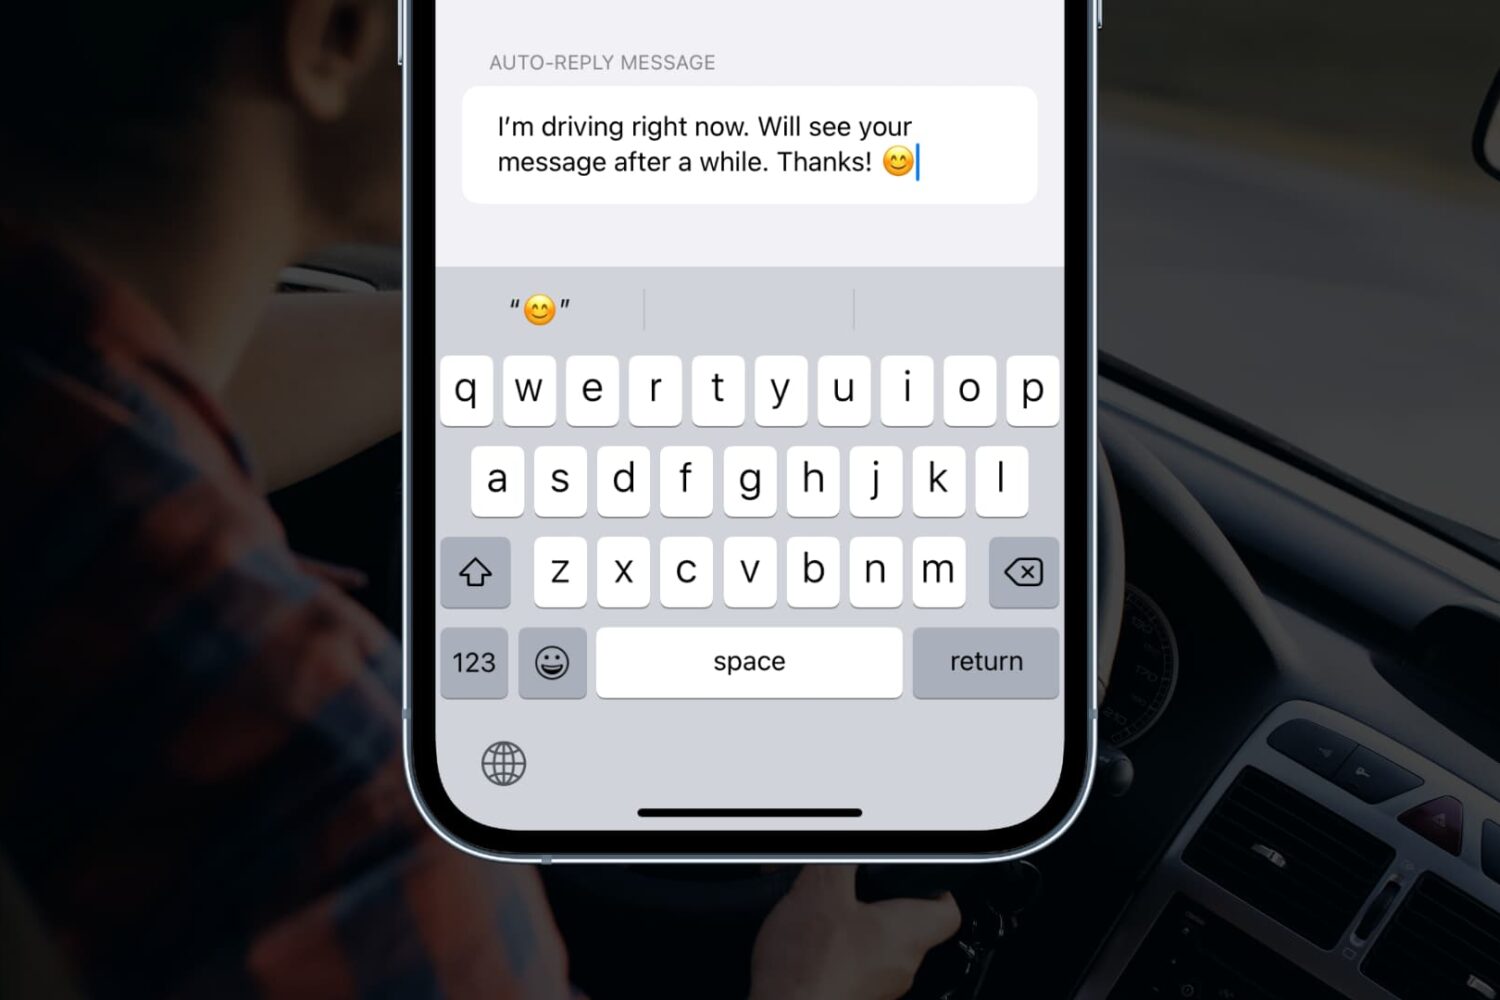 Driving Focus auto-reply response on iPhone